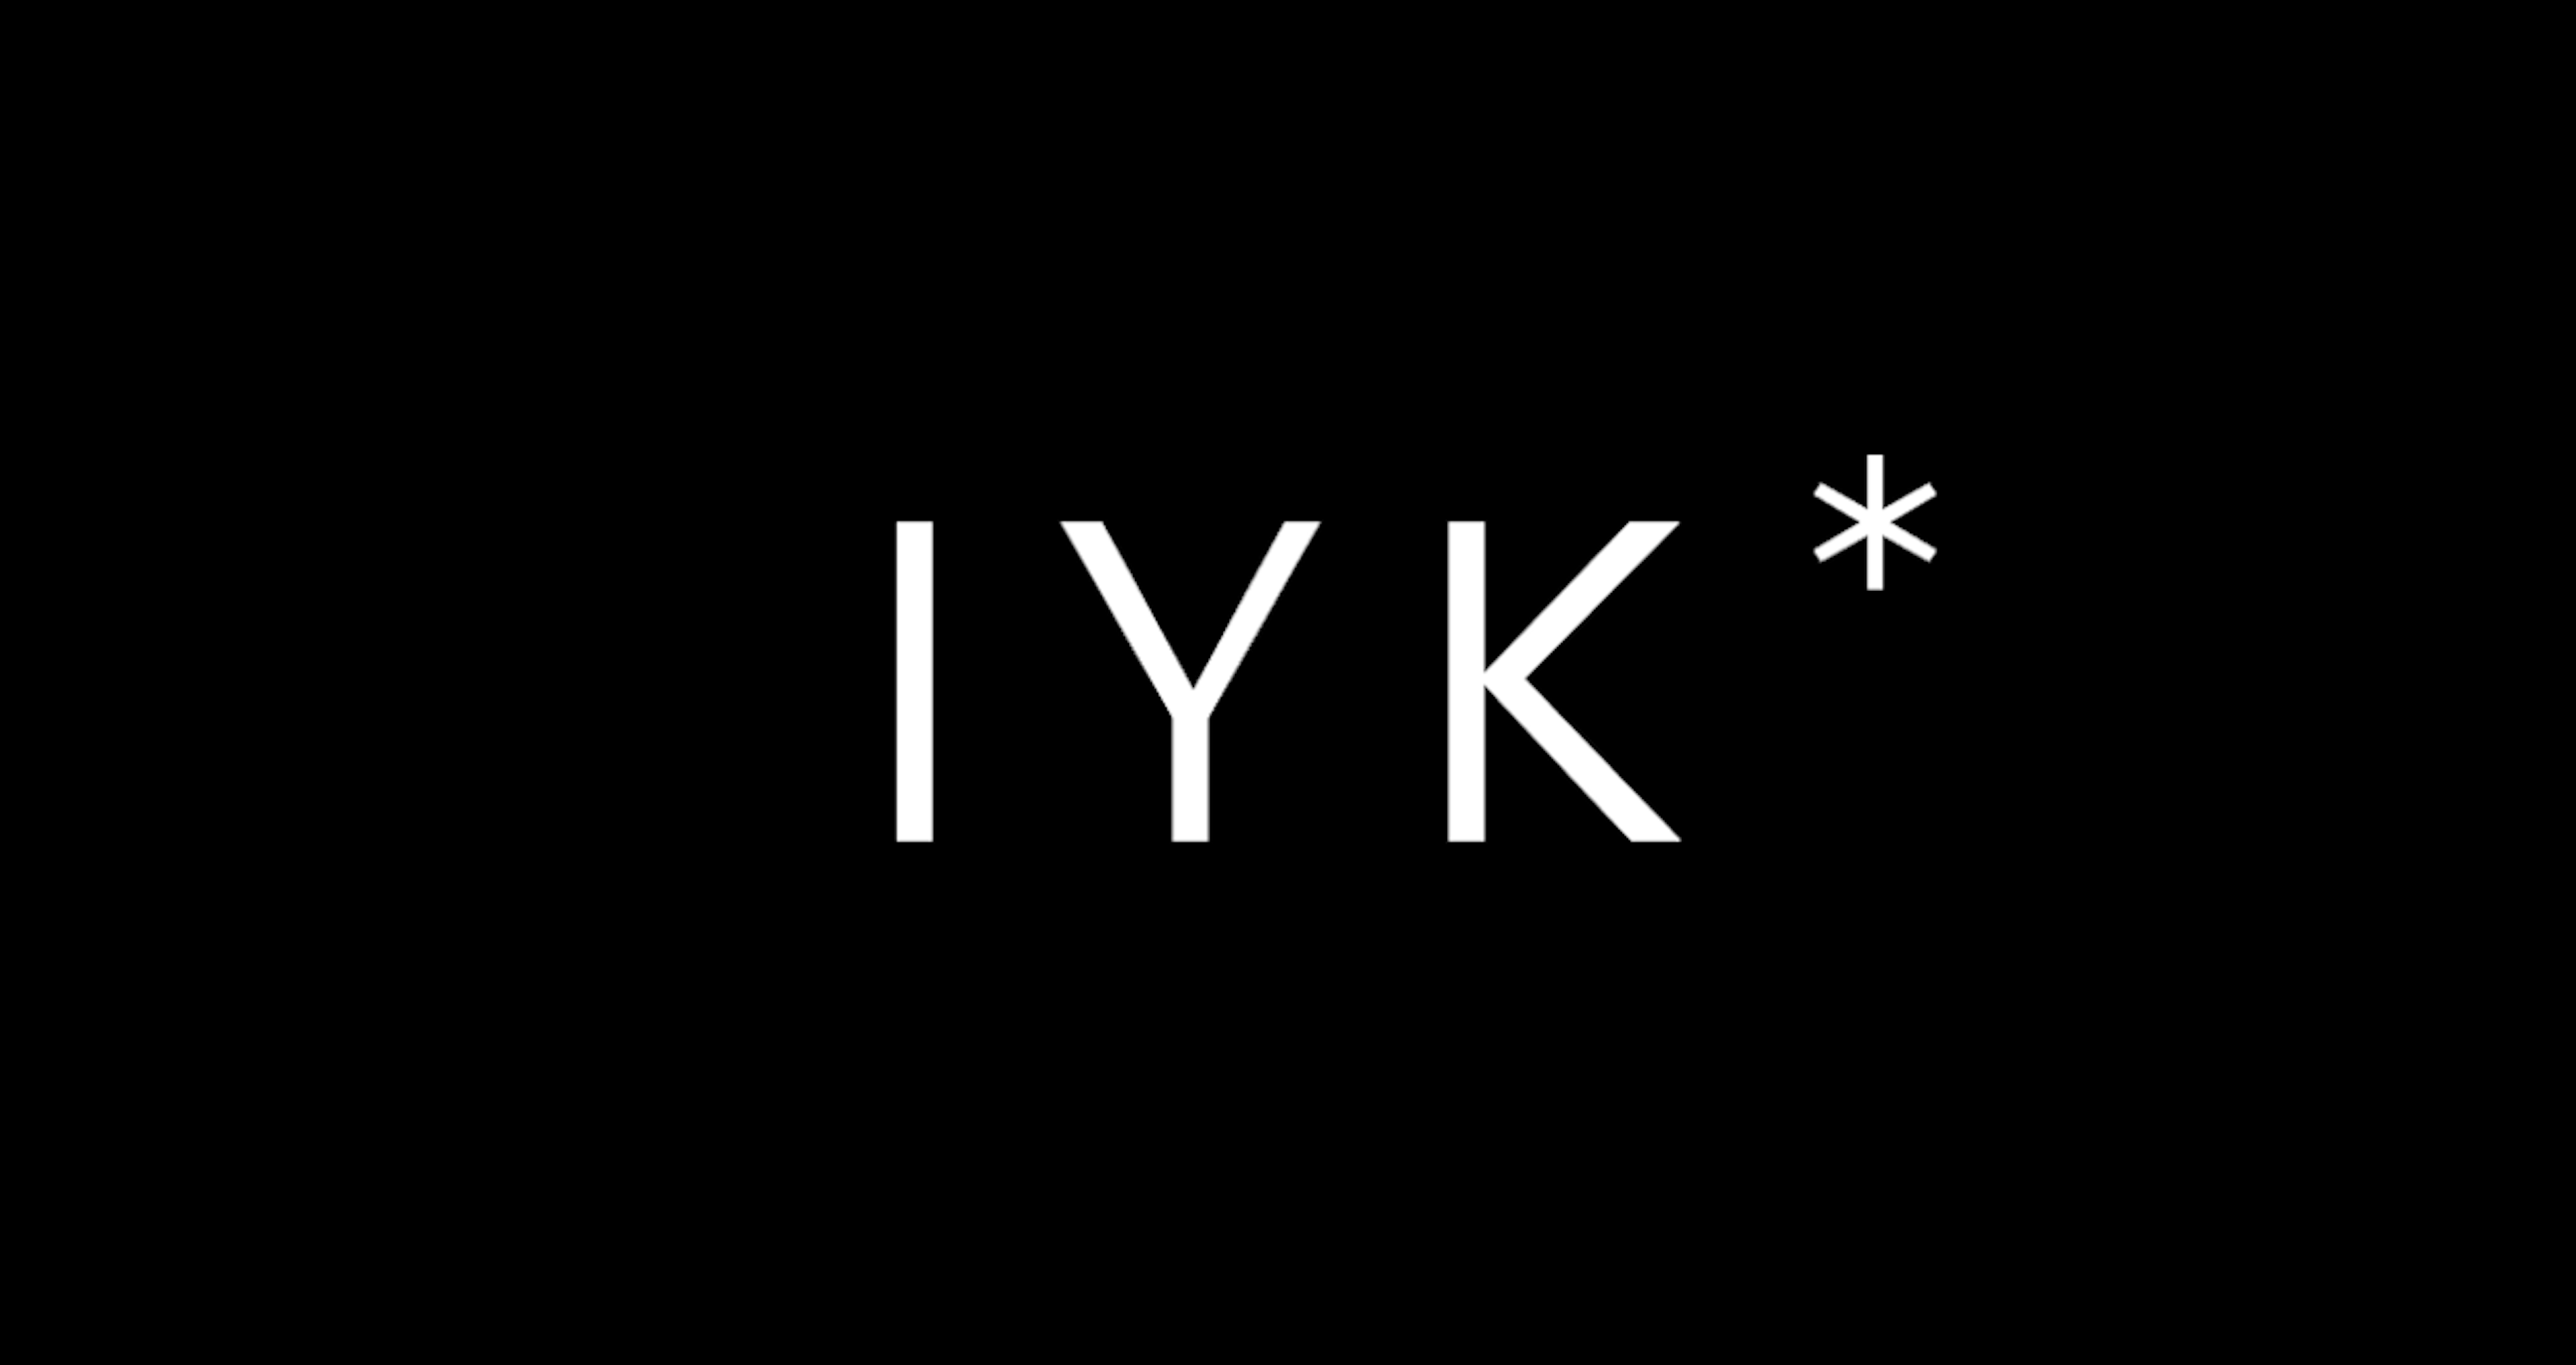 IYK uses community revenue sharing to promote creator contest  title